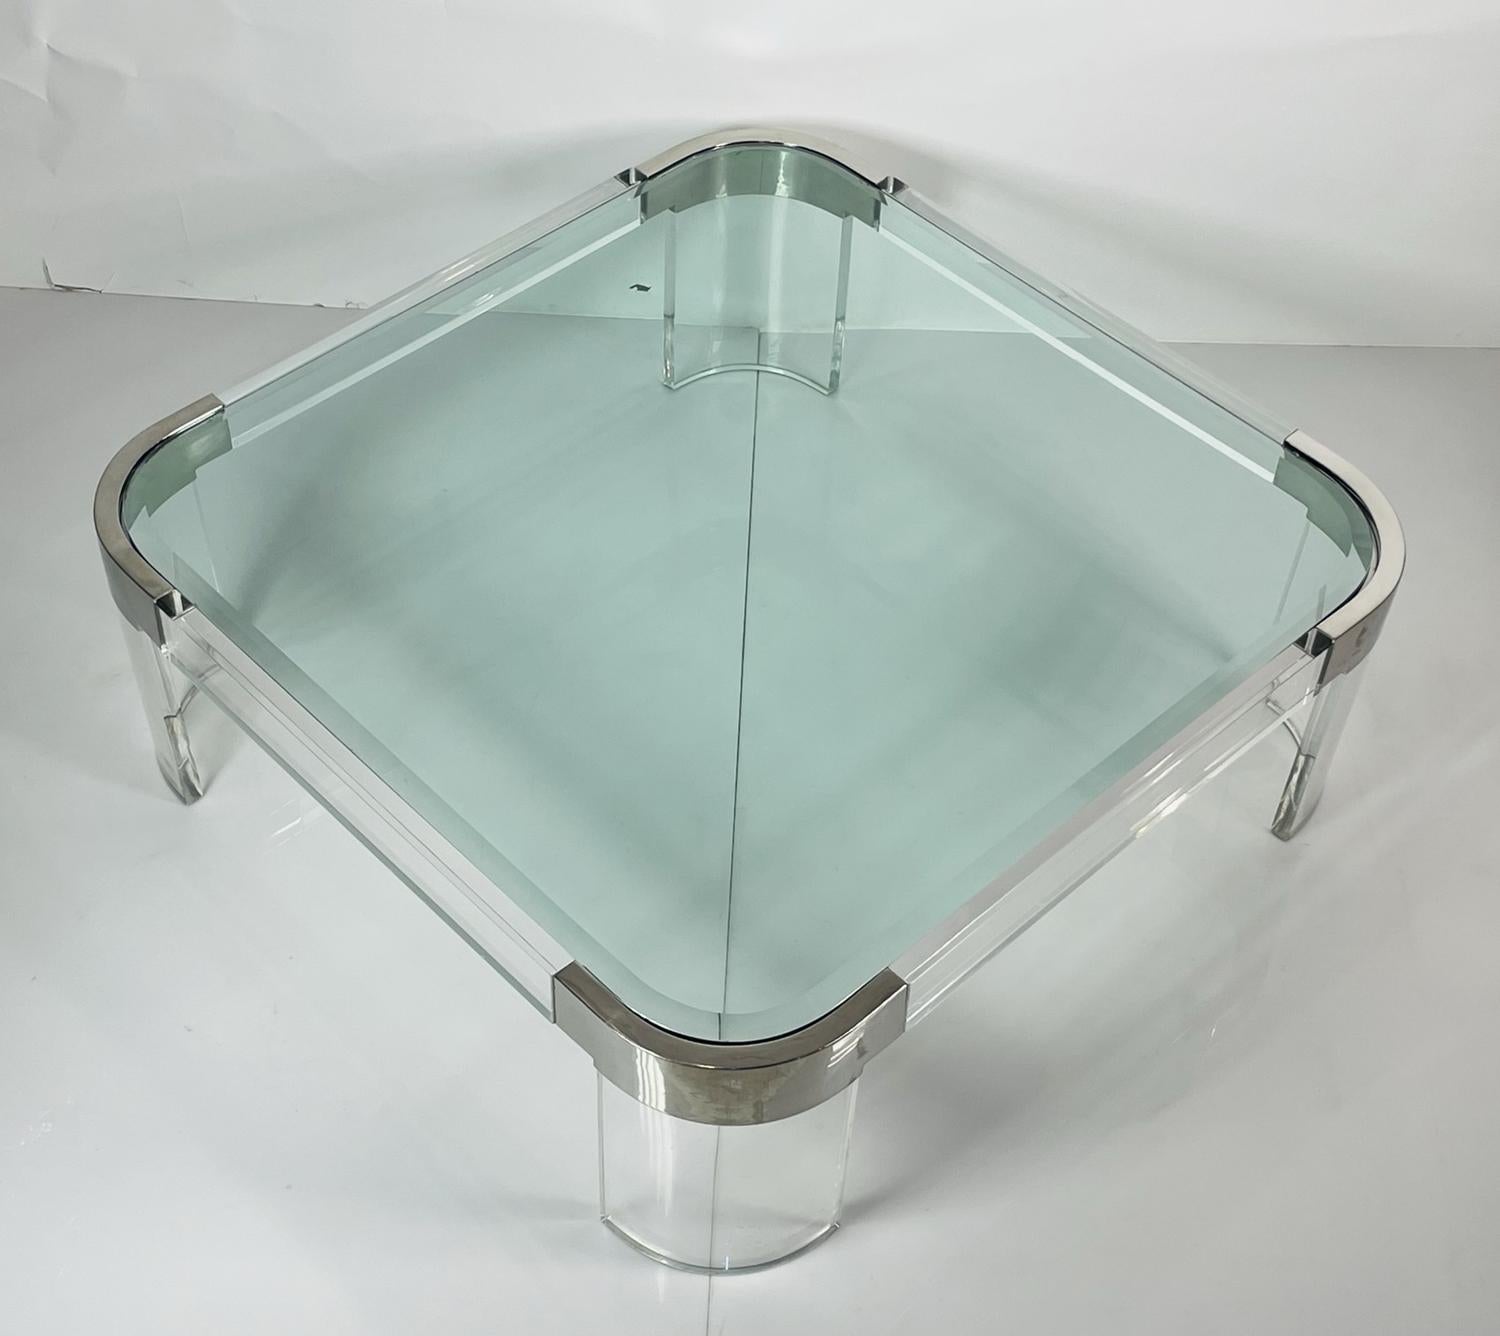 Charles Hollis Jones Waterfall Coffee Table in Lucite, Glass & Polished Nickel For Sale 10